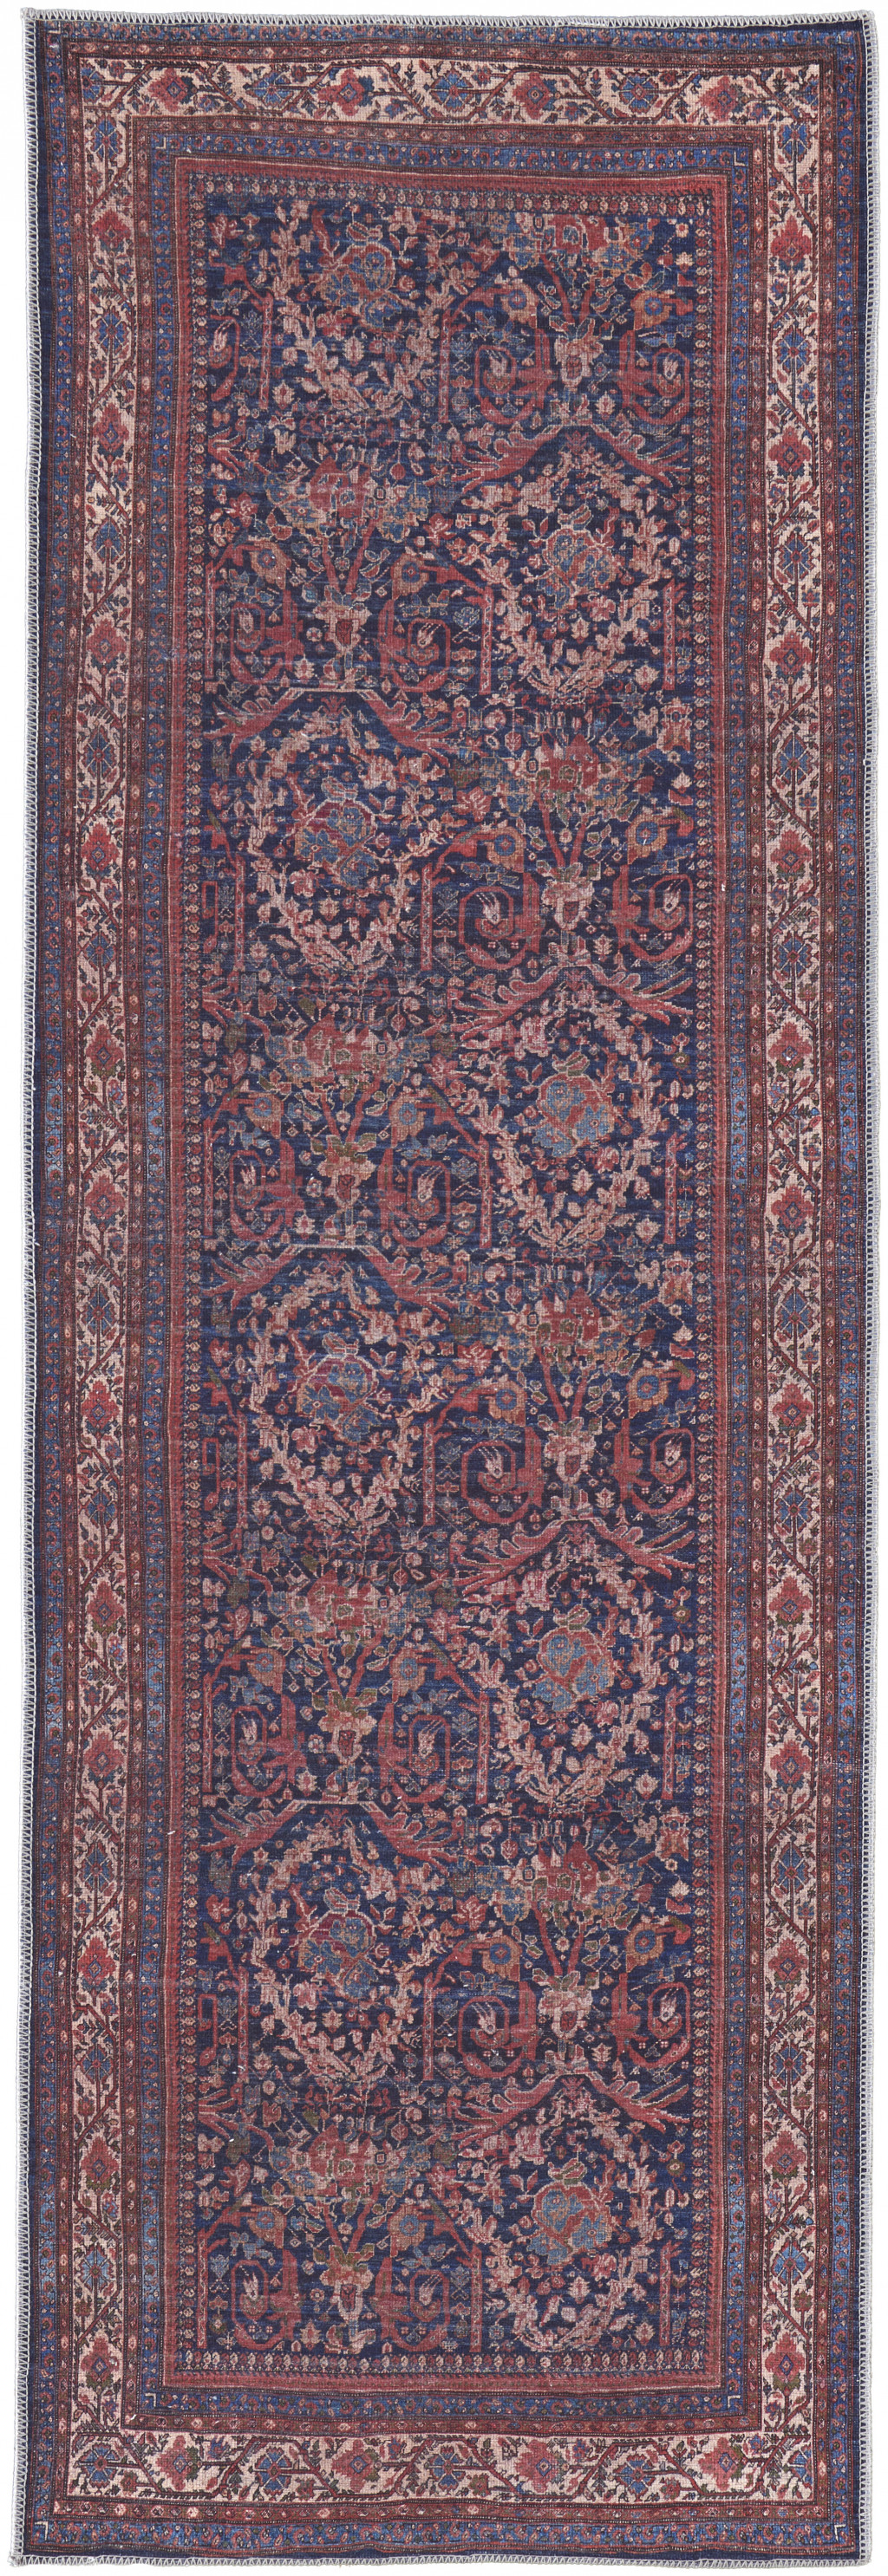 8' Red Blue And Tan Floral Power Loom Runner Rug-515110-1